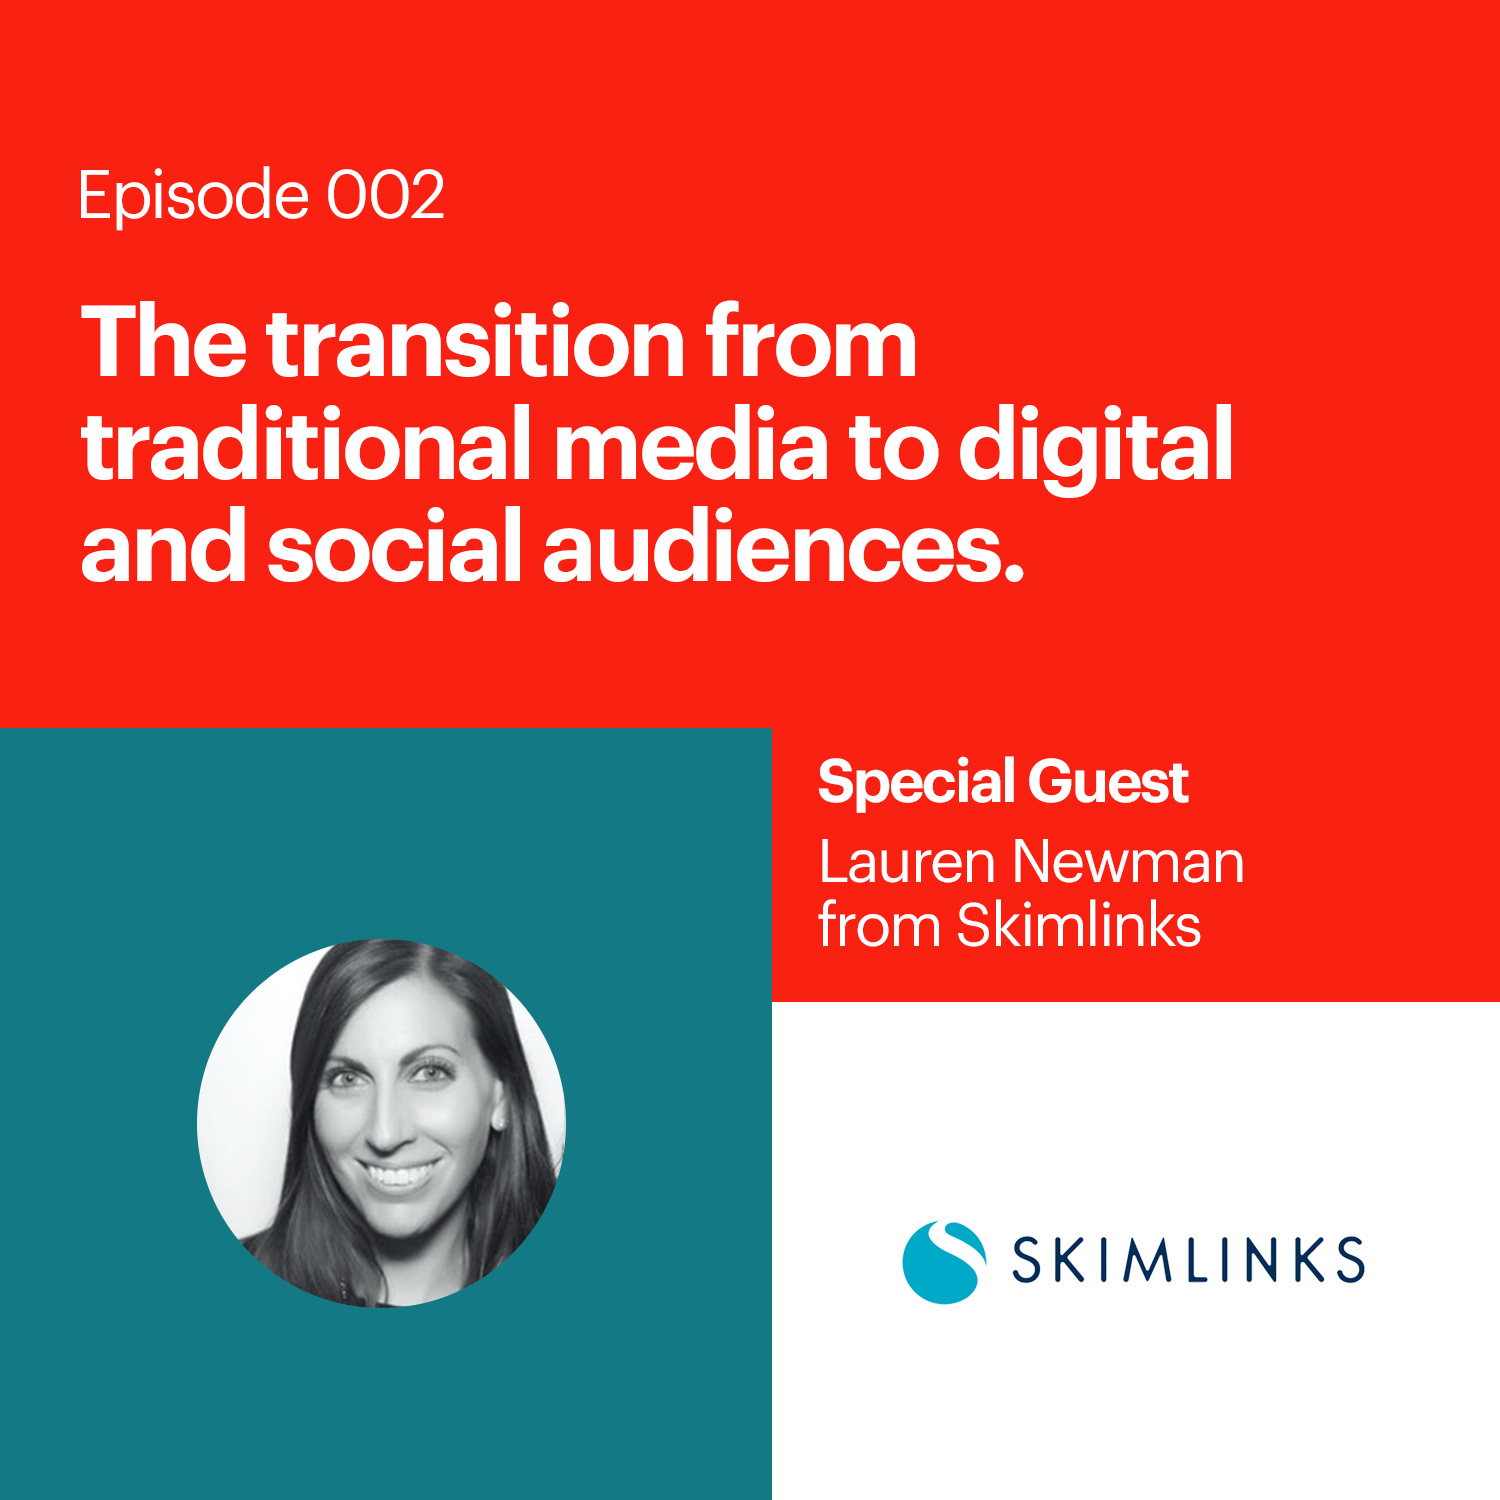 The transition from traditional media to digital and social audiences with Lauren Newman of Skimlinks.